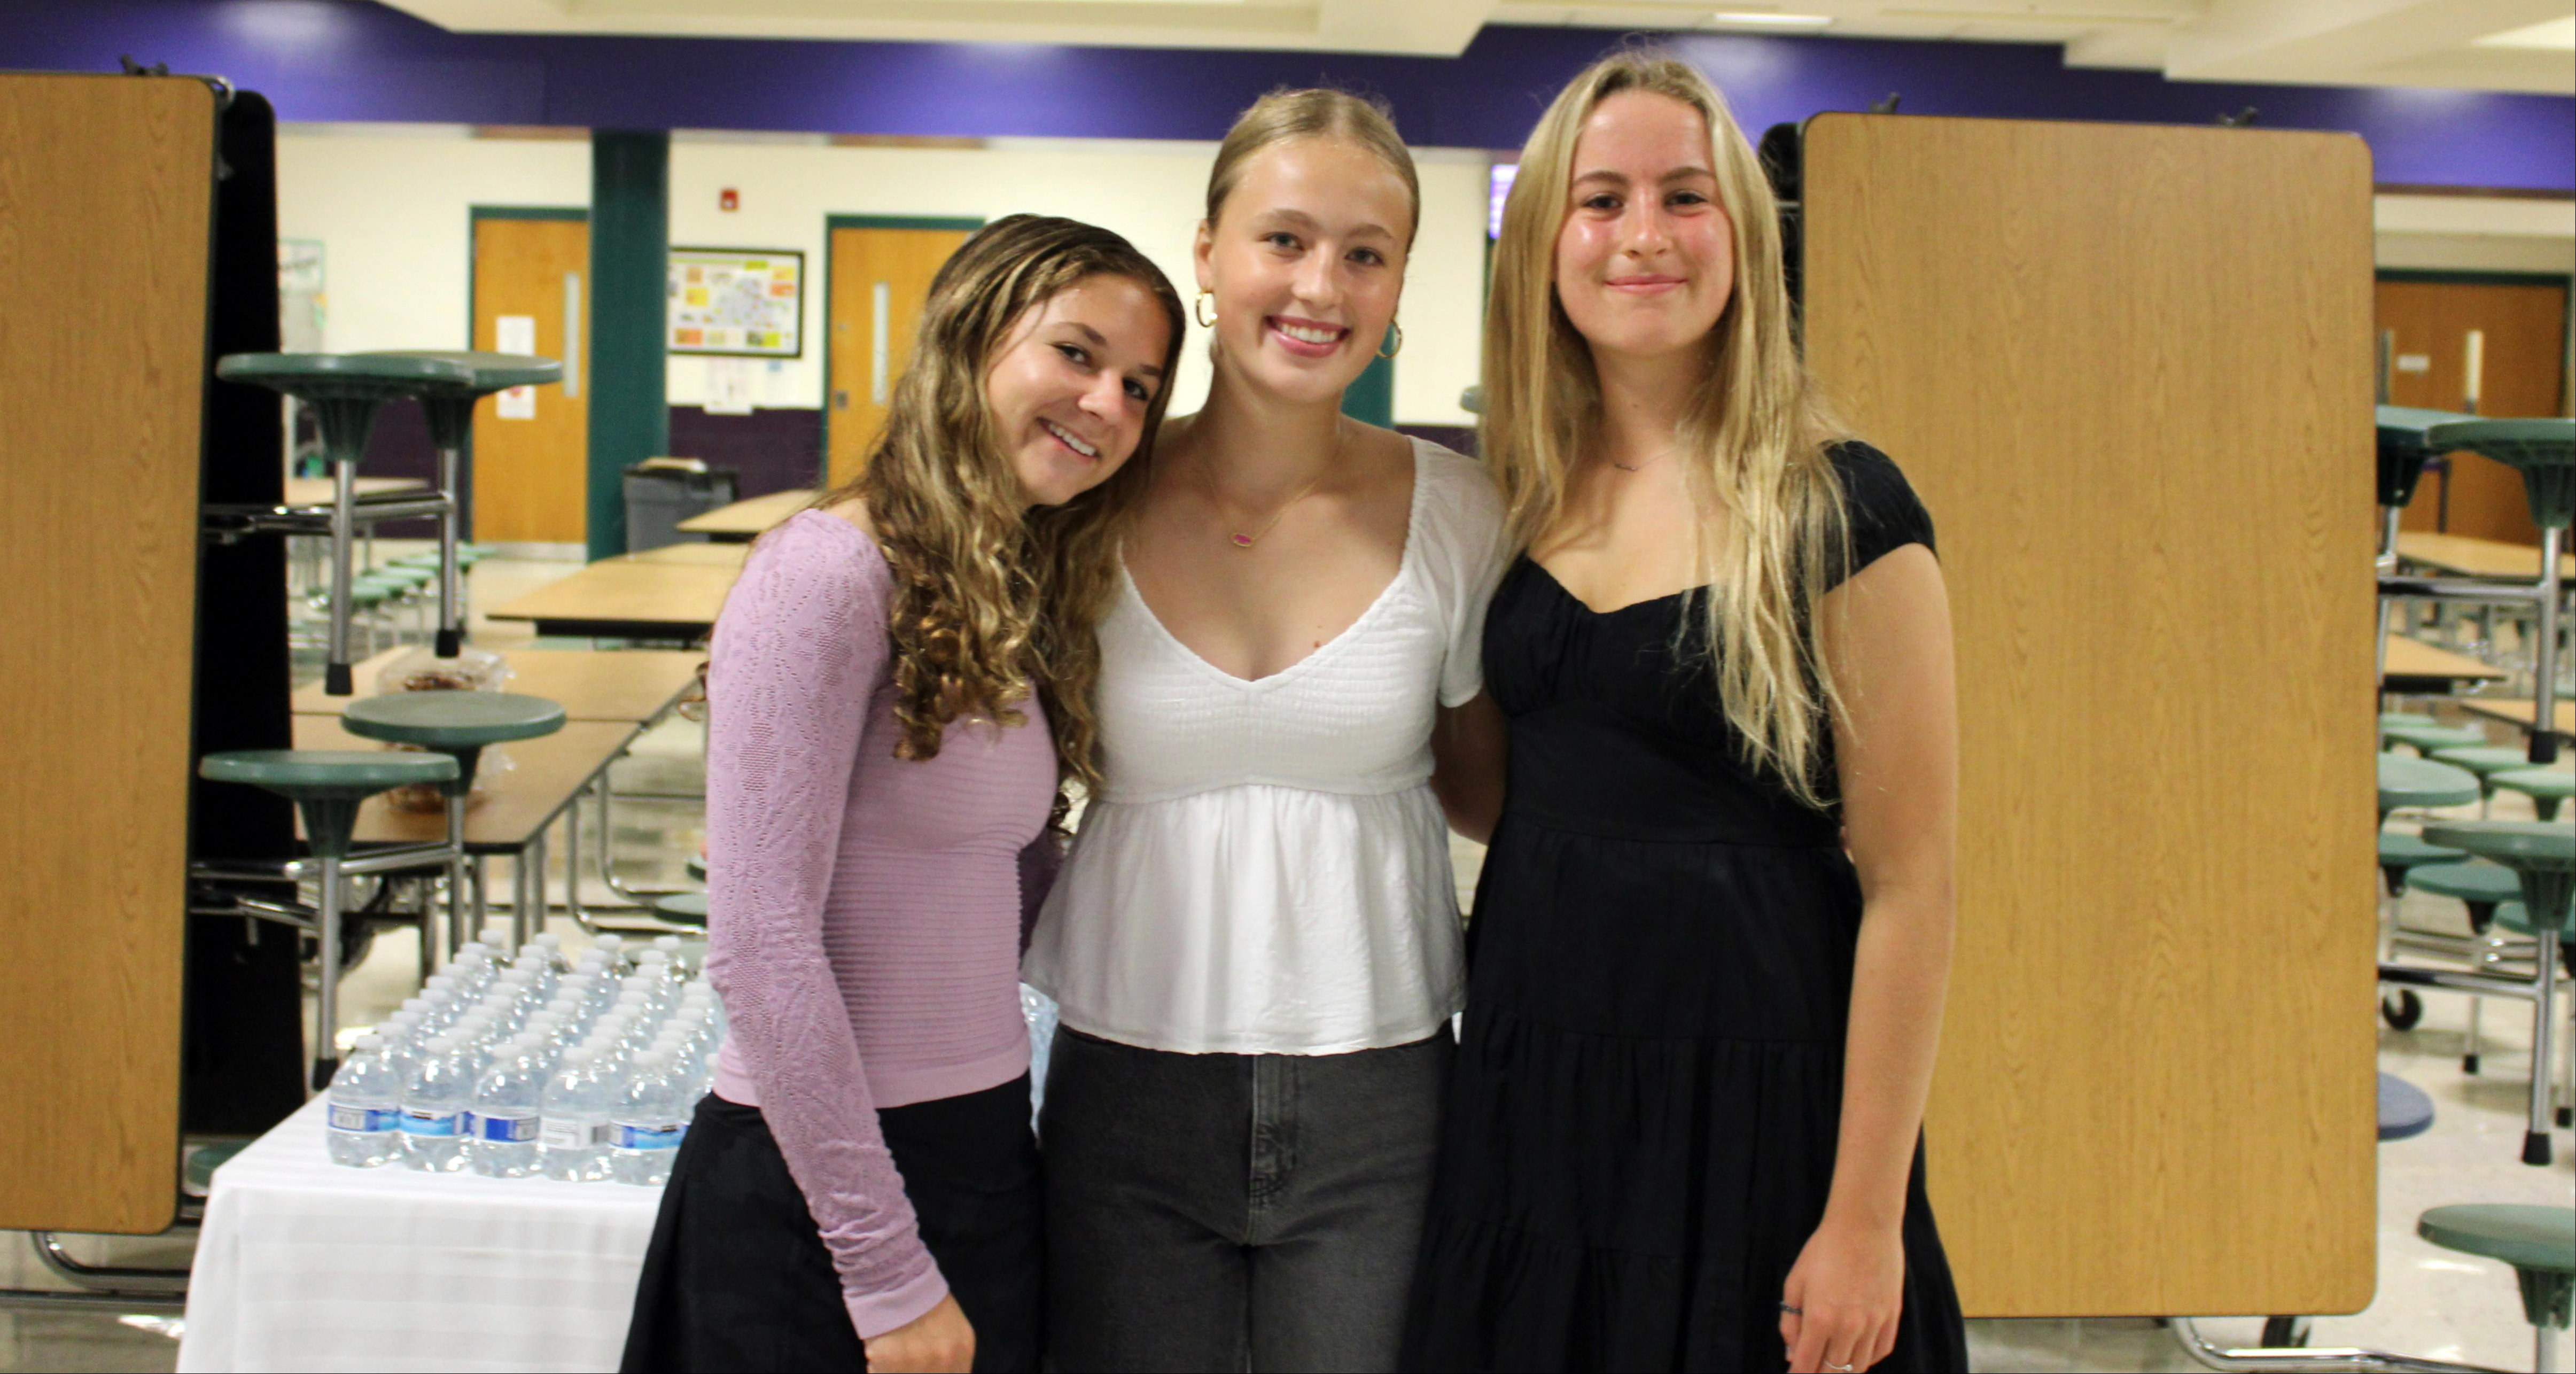 Three girls smiling in the school cafeteria